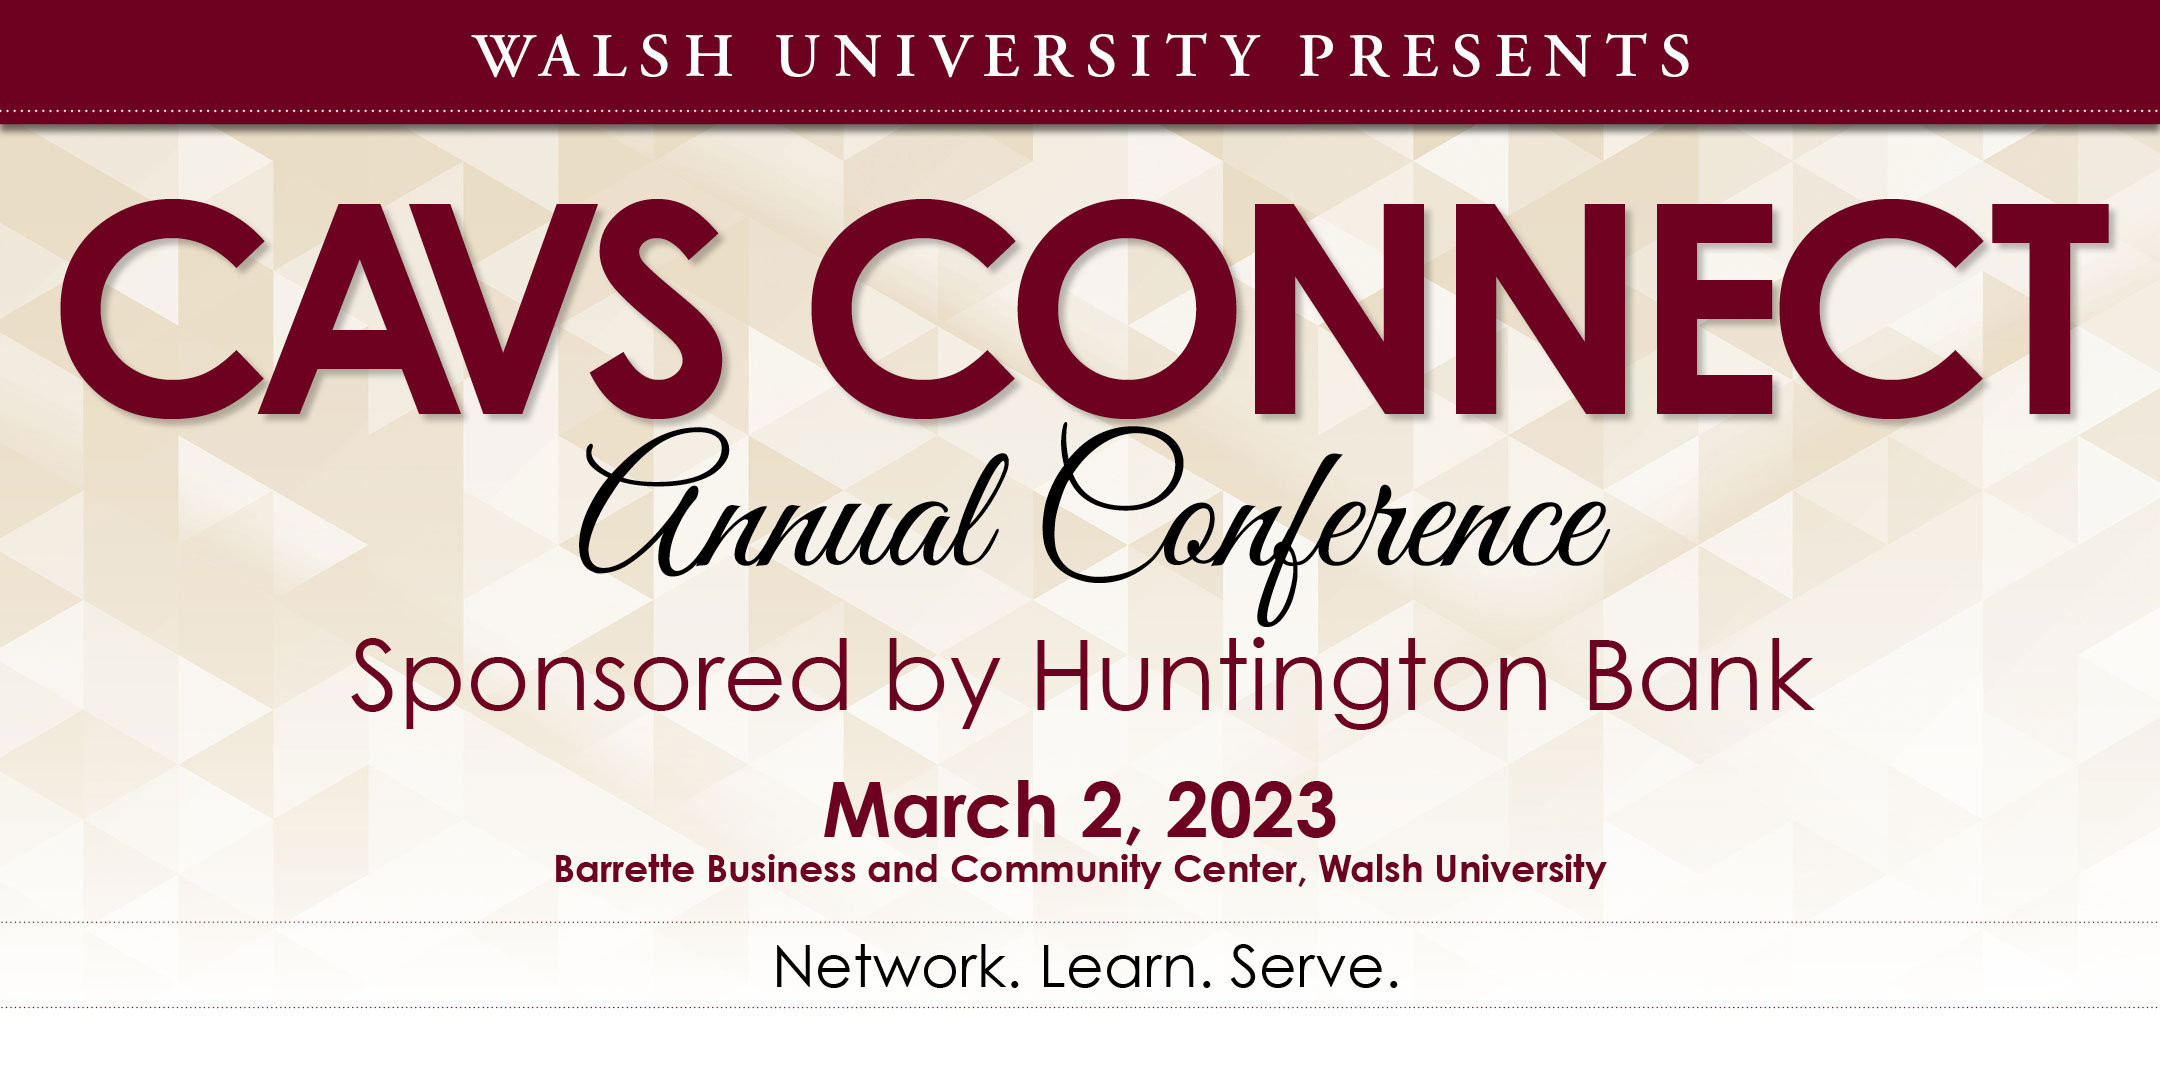 Cavs Connect Annual Conference